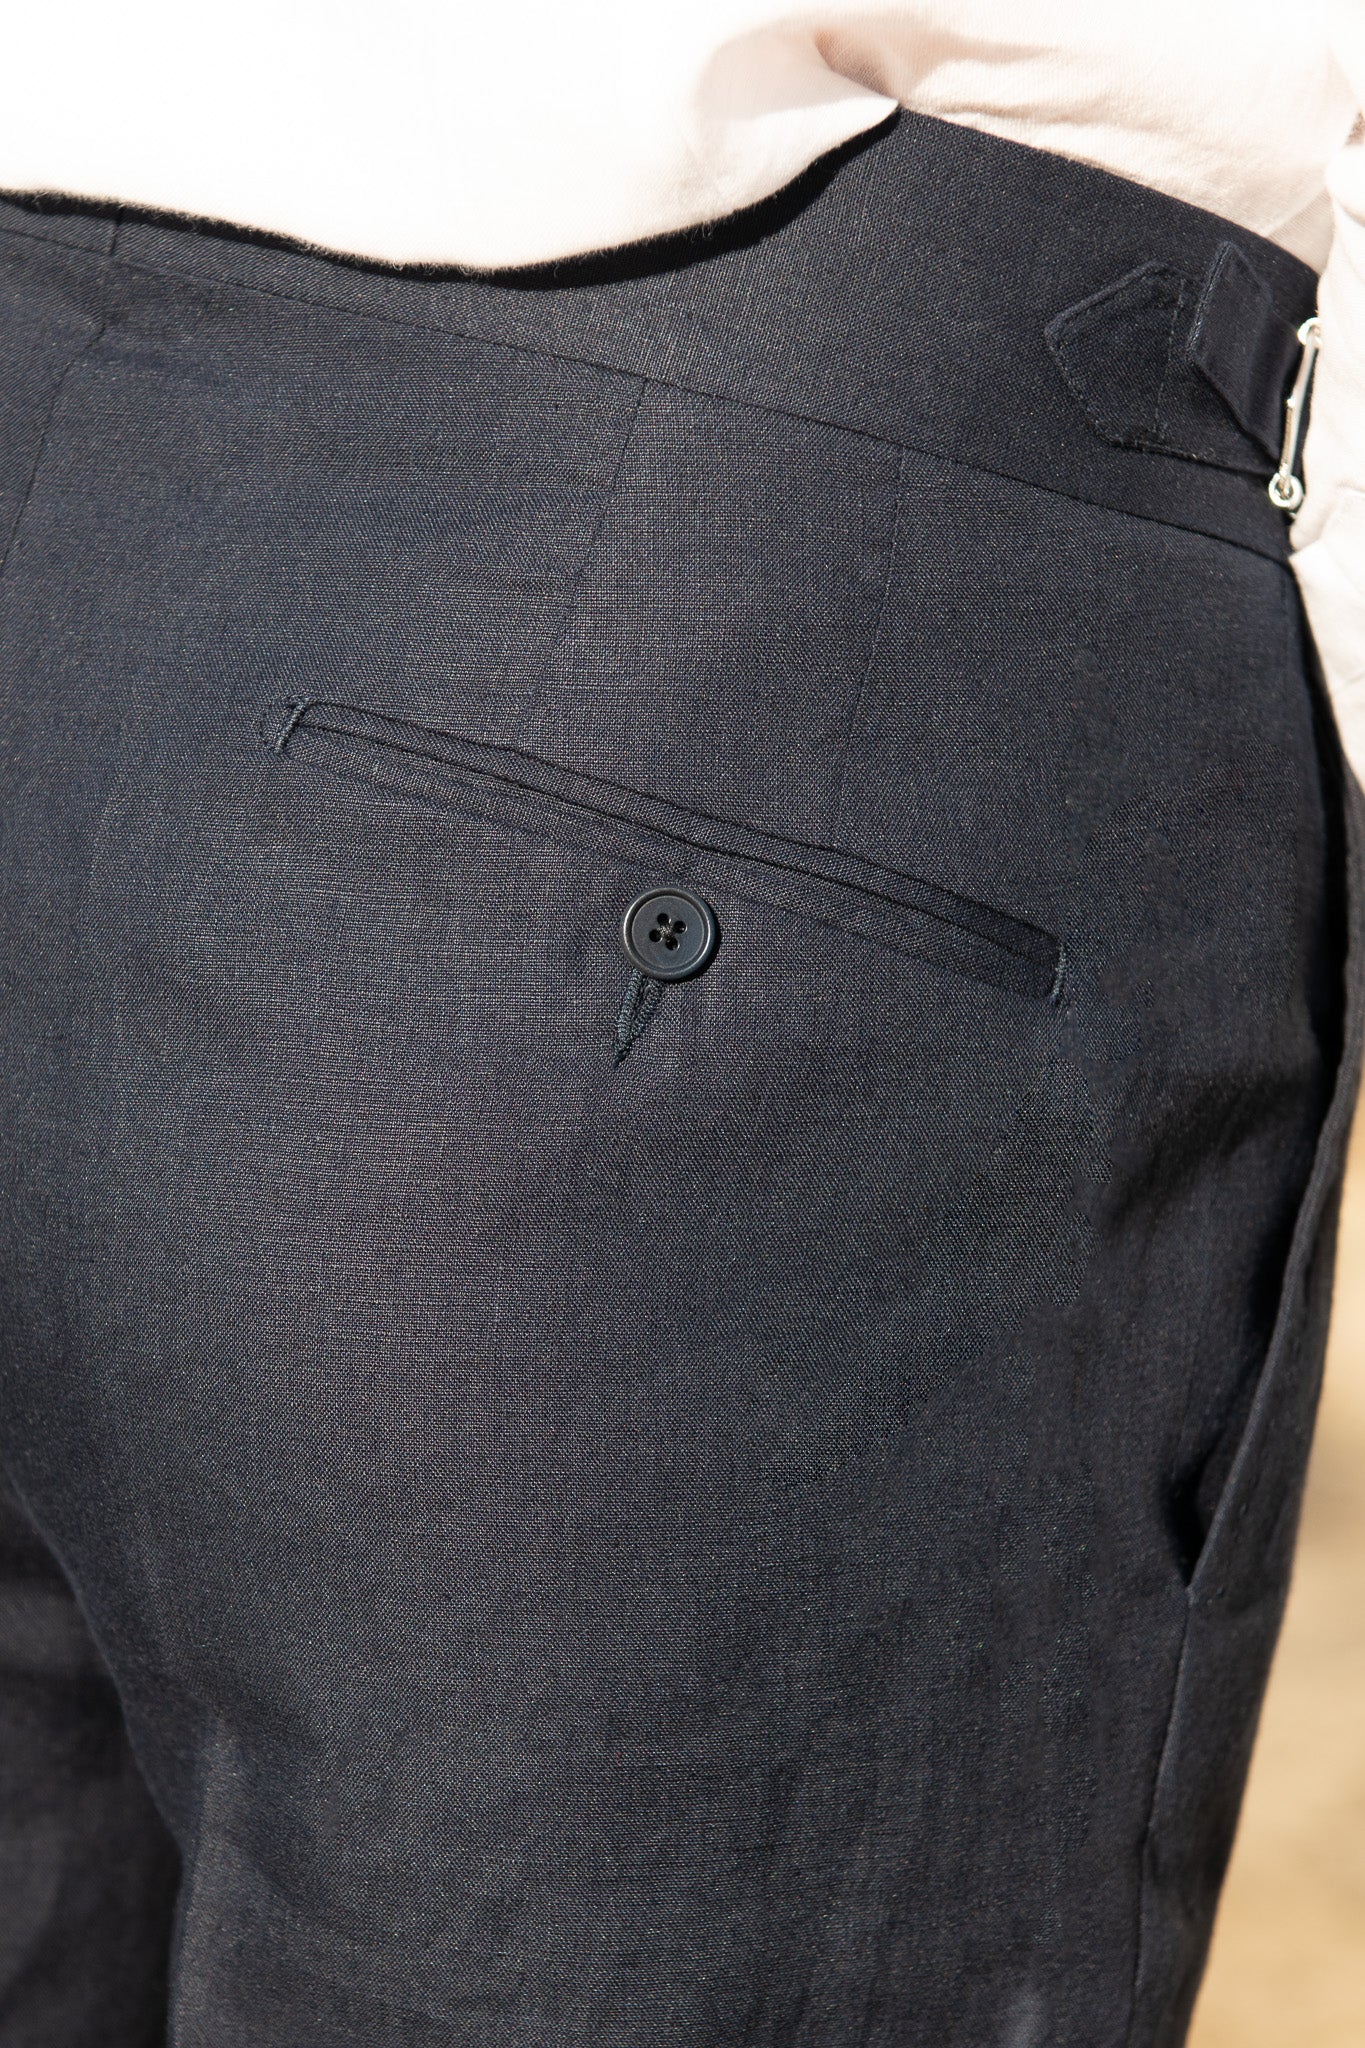 Blue linen trousers "Soragna Capsule Collection" - Made in Italy